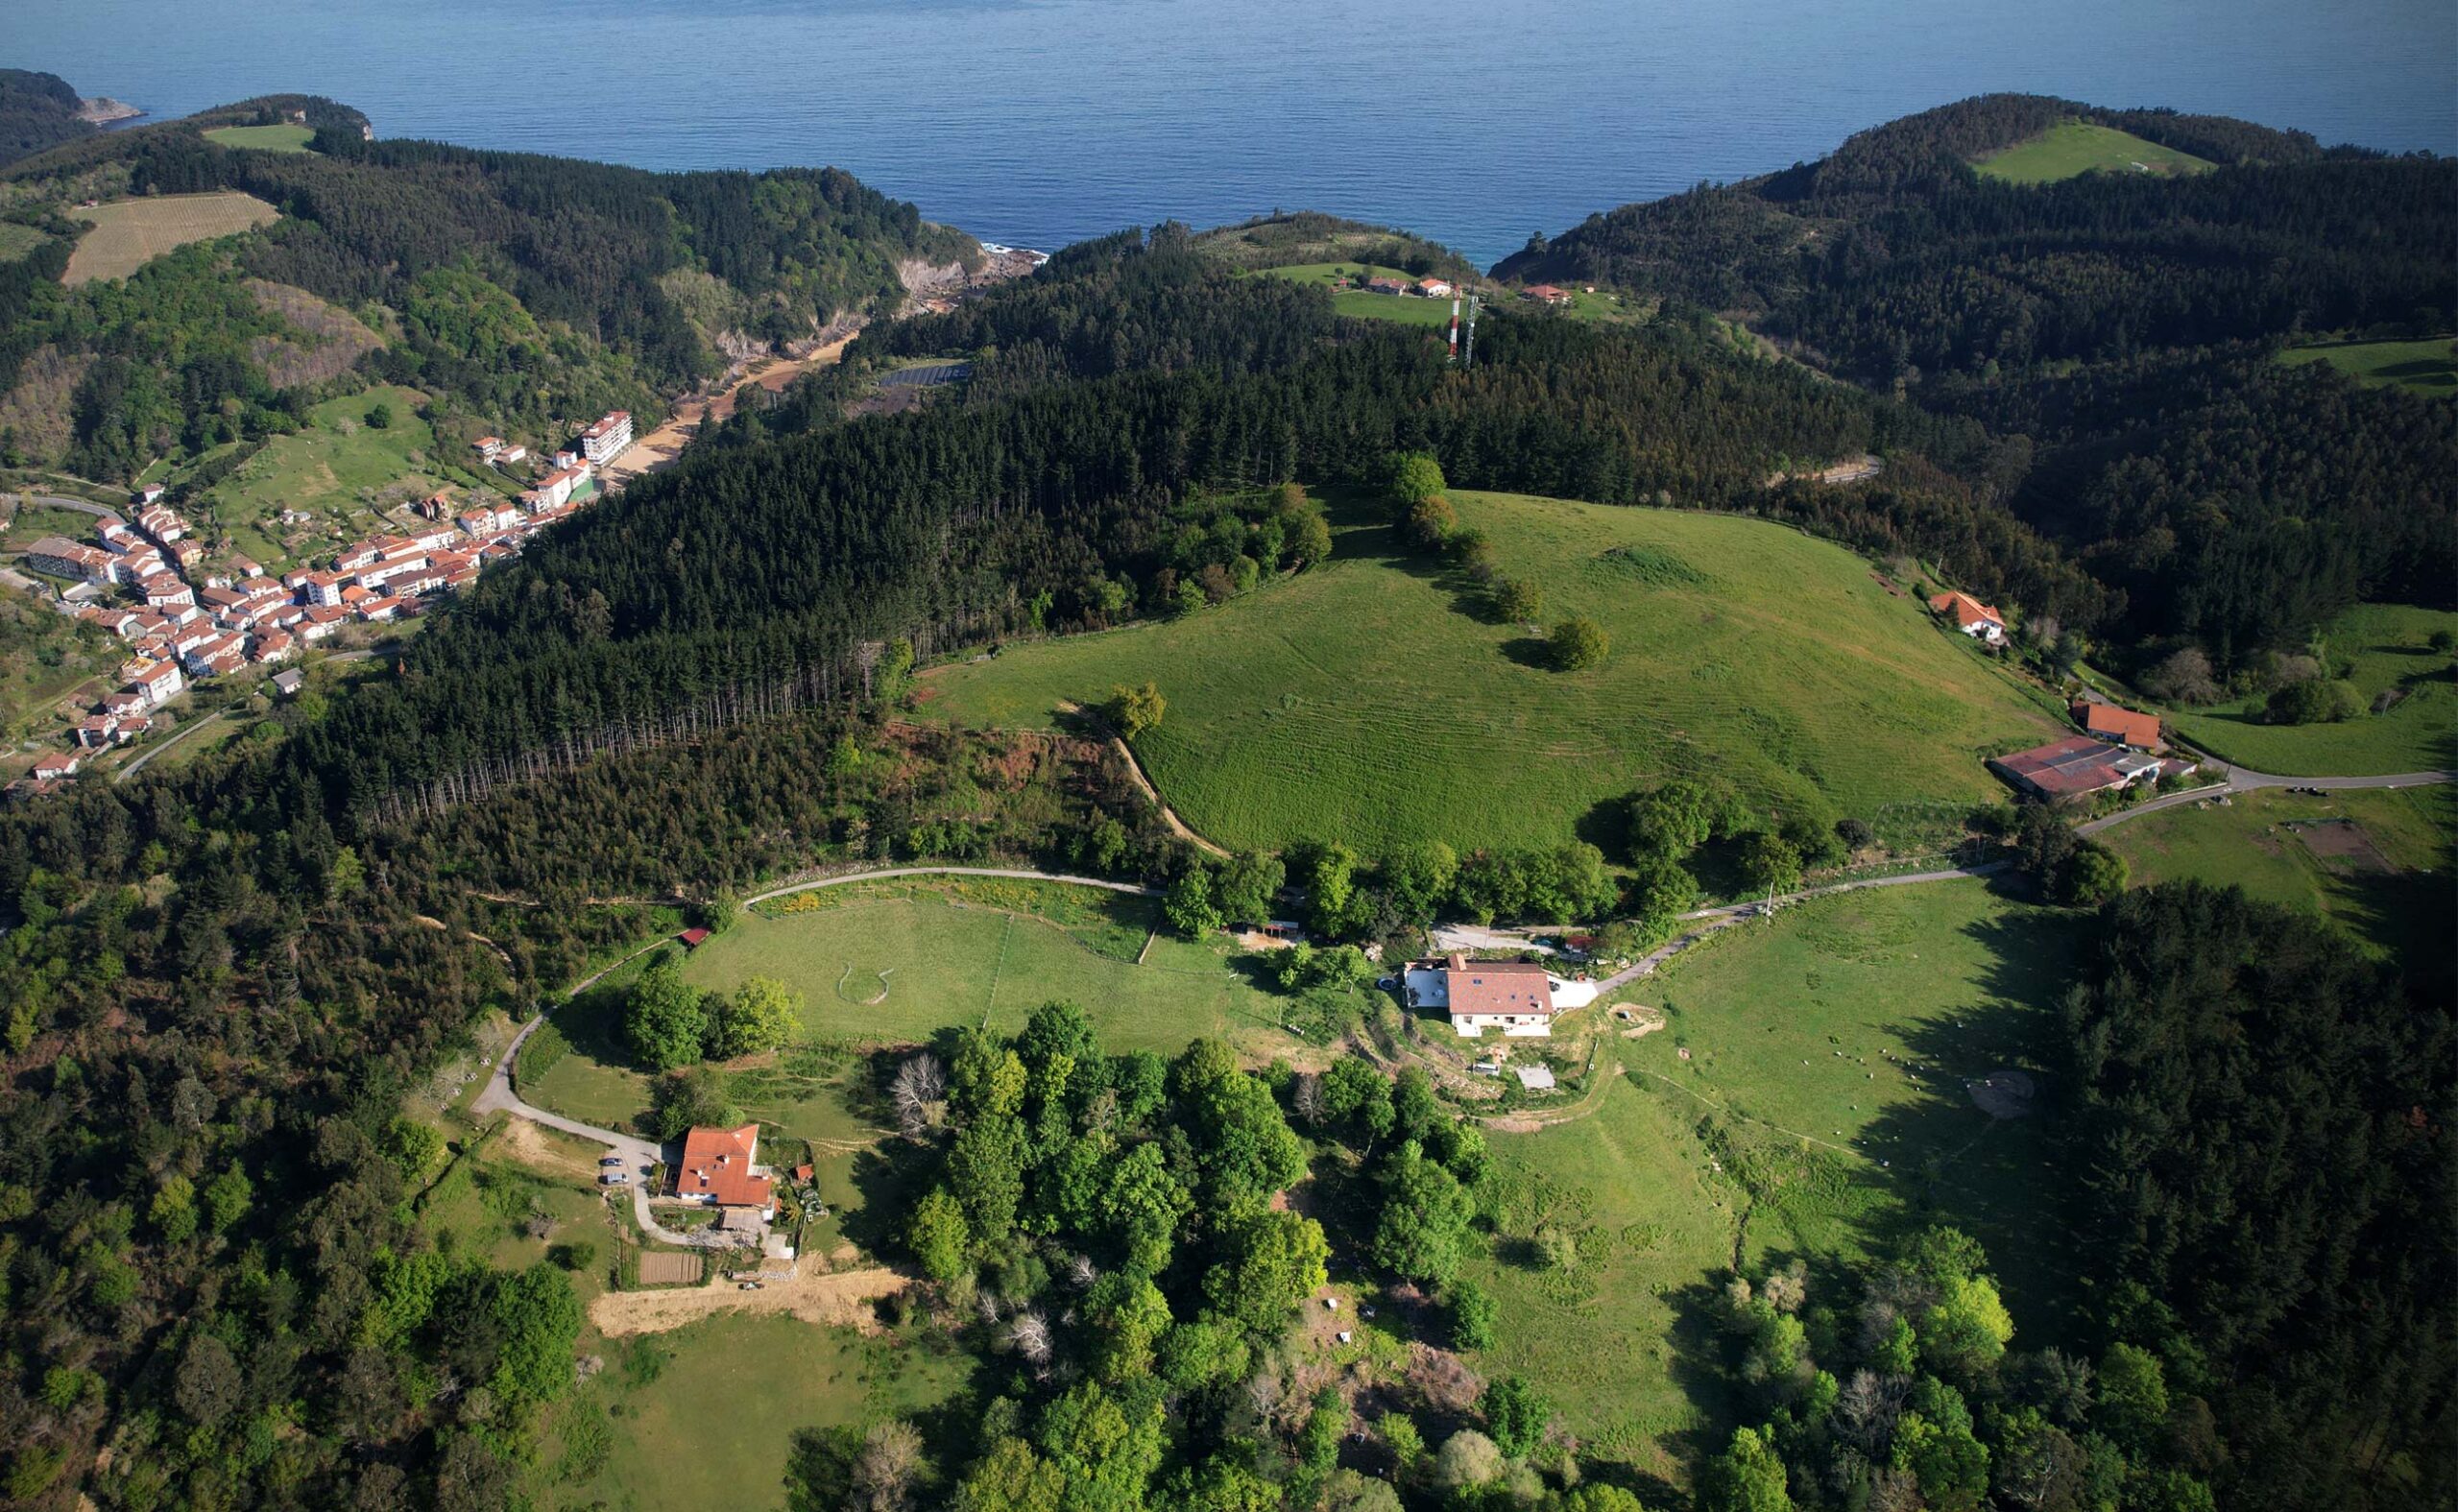 Olabe - Basque Country farmhouse, hostel and cultural event space